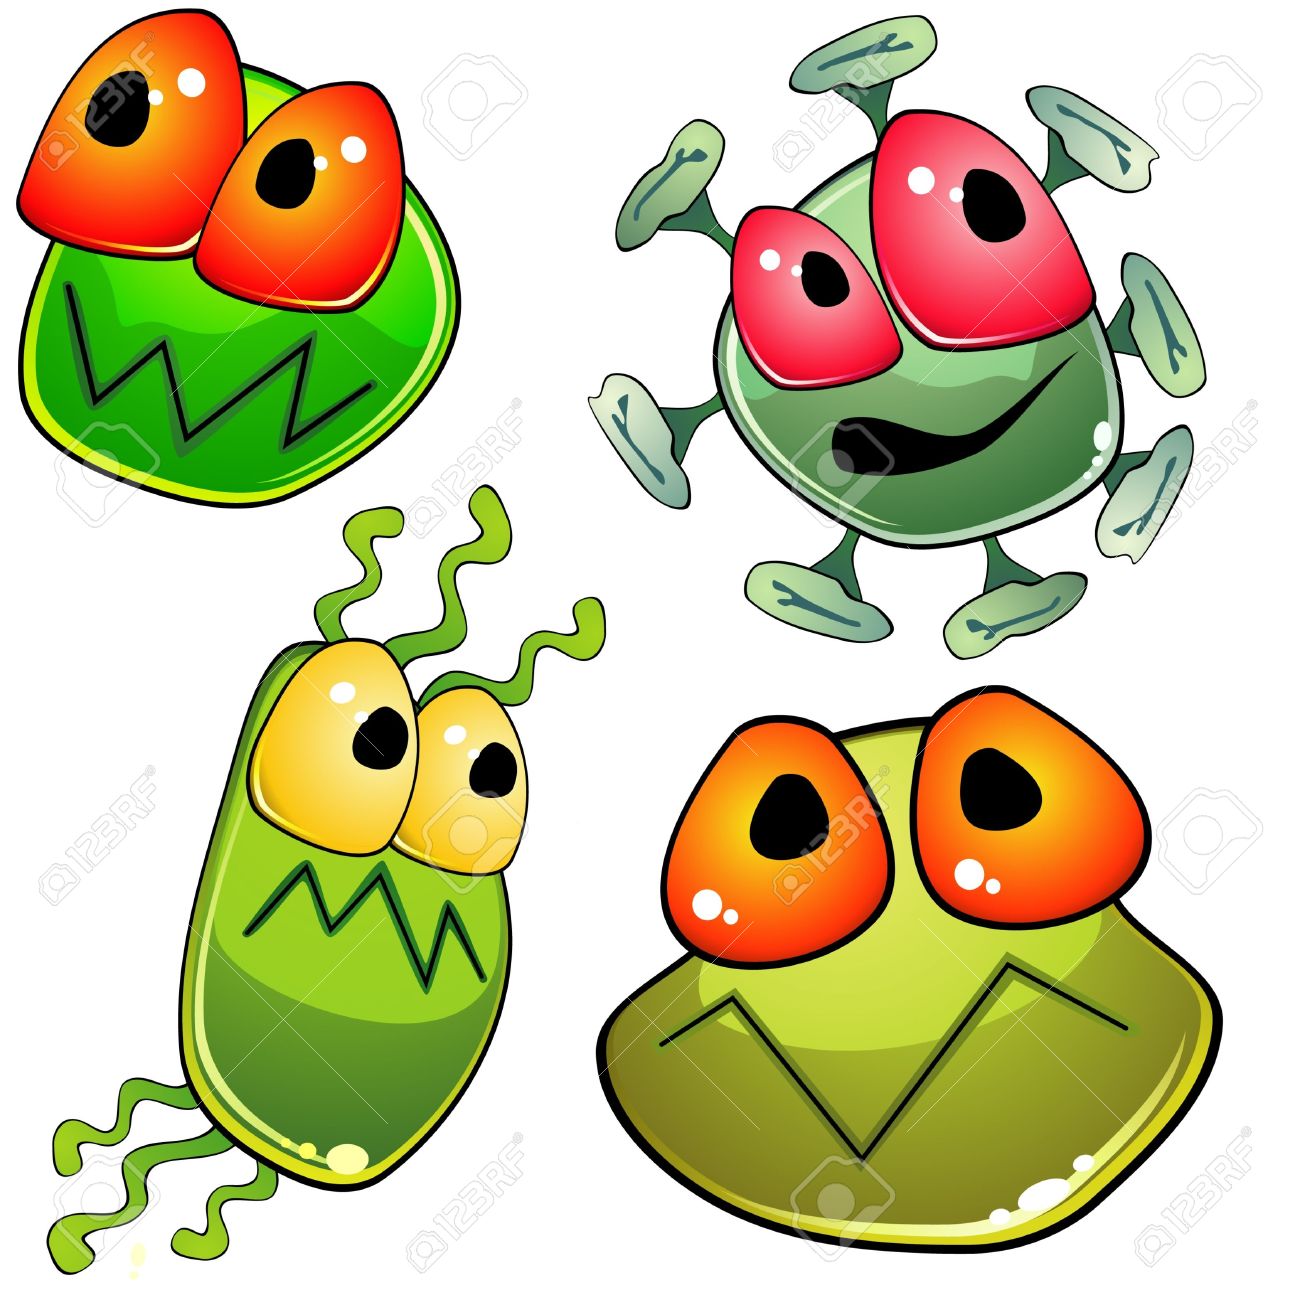 Microbe clipart #5, Download drawings